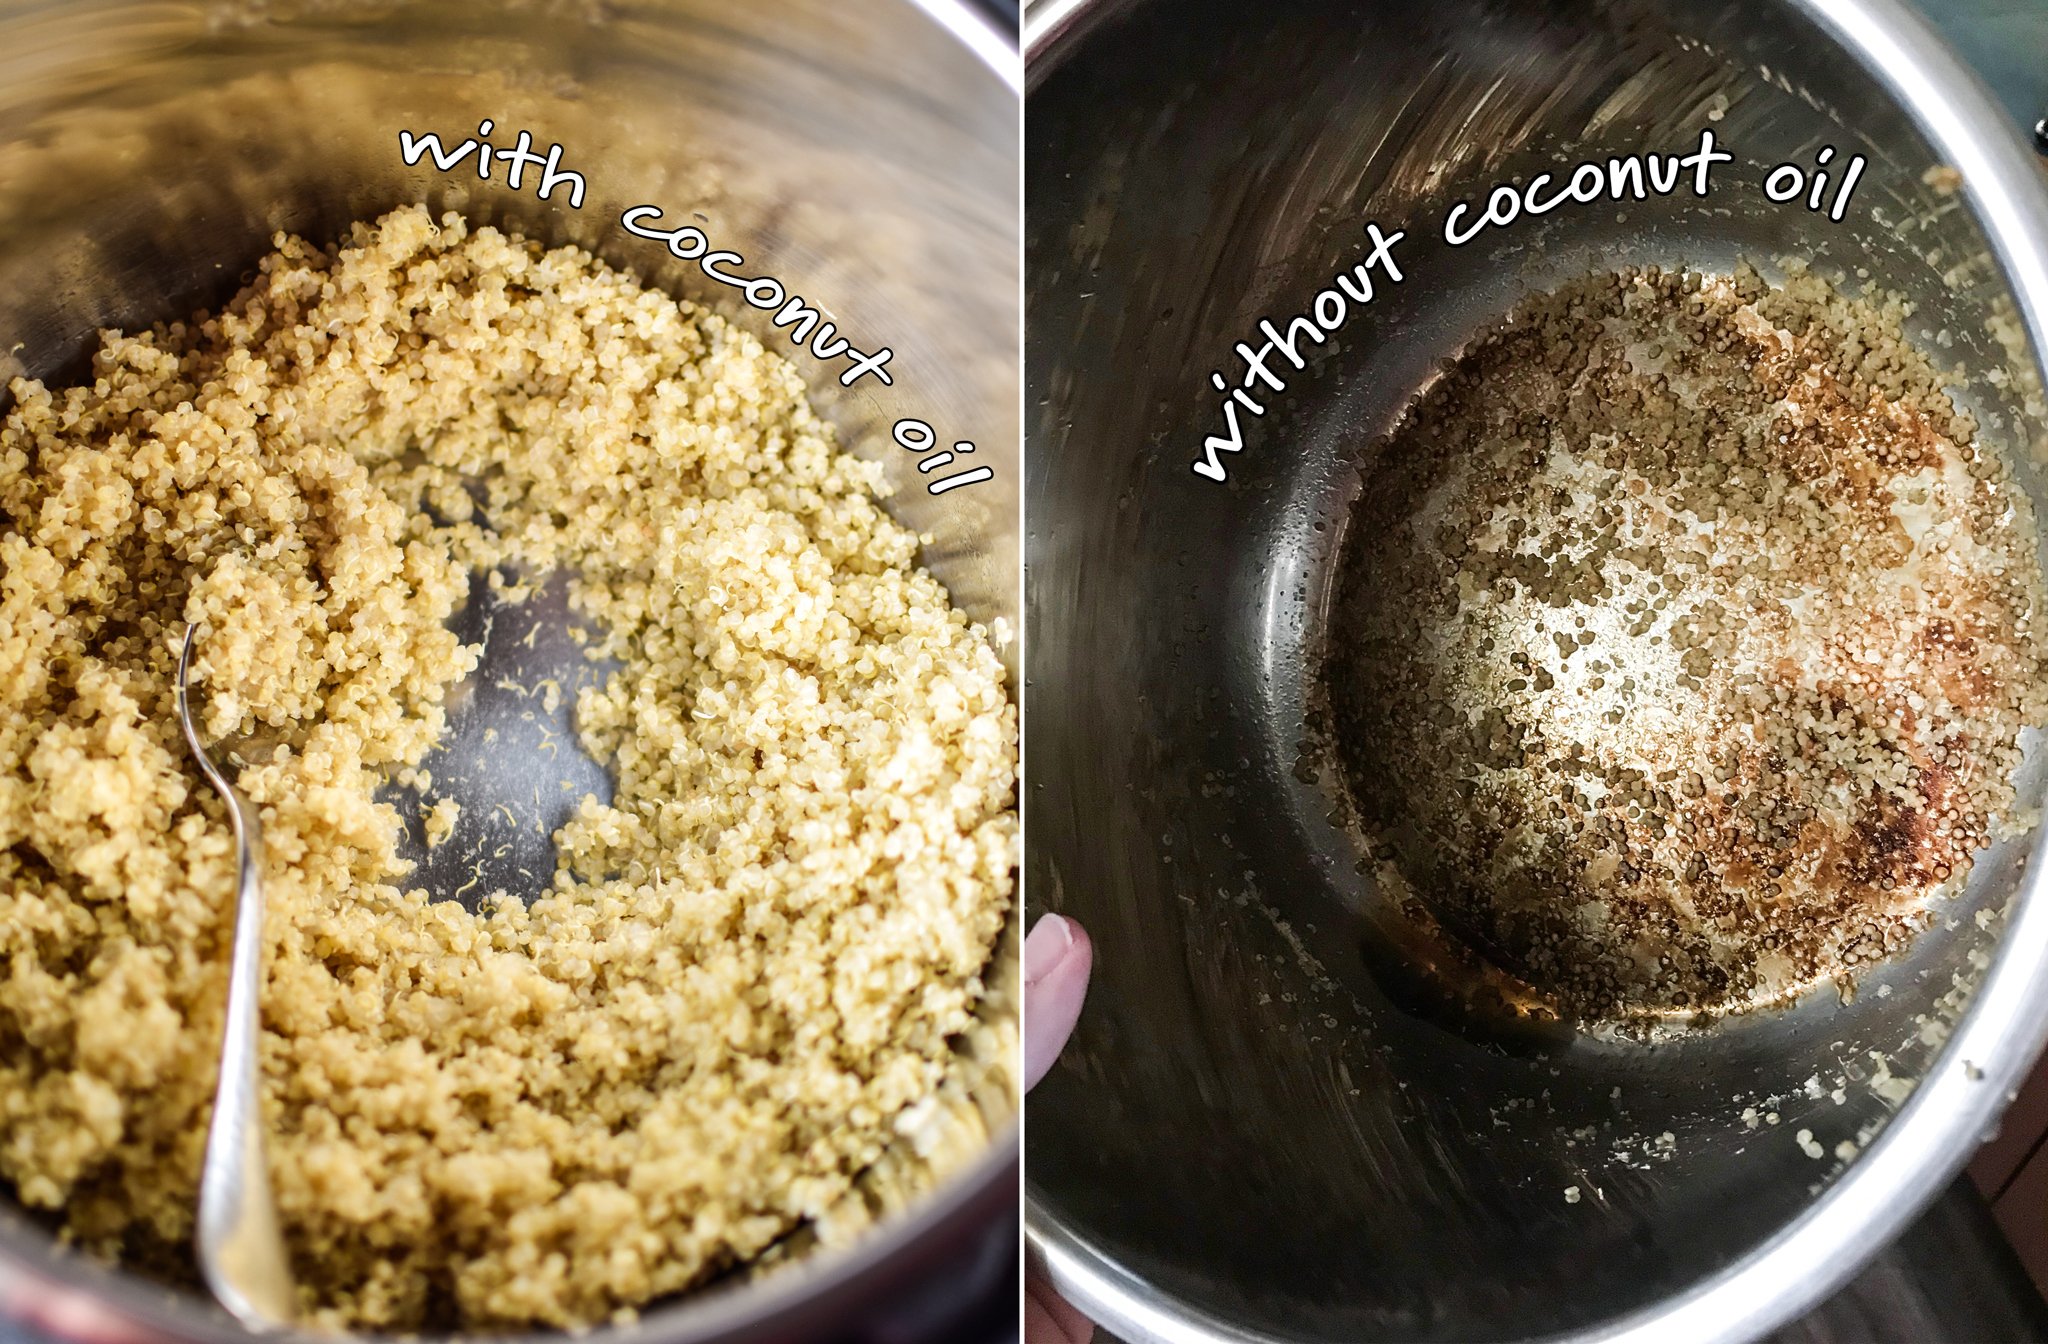 Two images showing the difference on the bottom of the pan when you use coconut oil versus when you don't. The left side without coconut oil is a bit more brown and dirty looking.